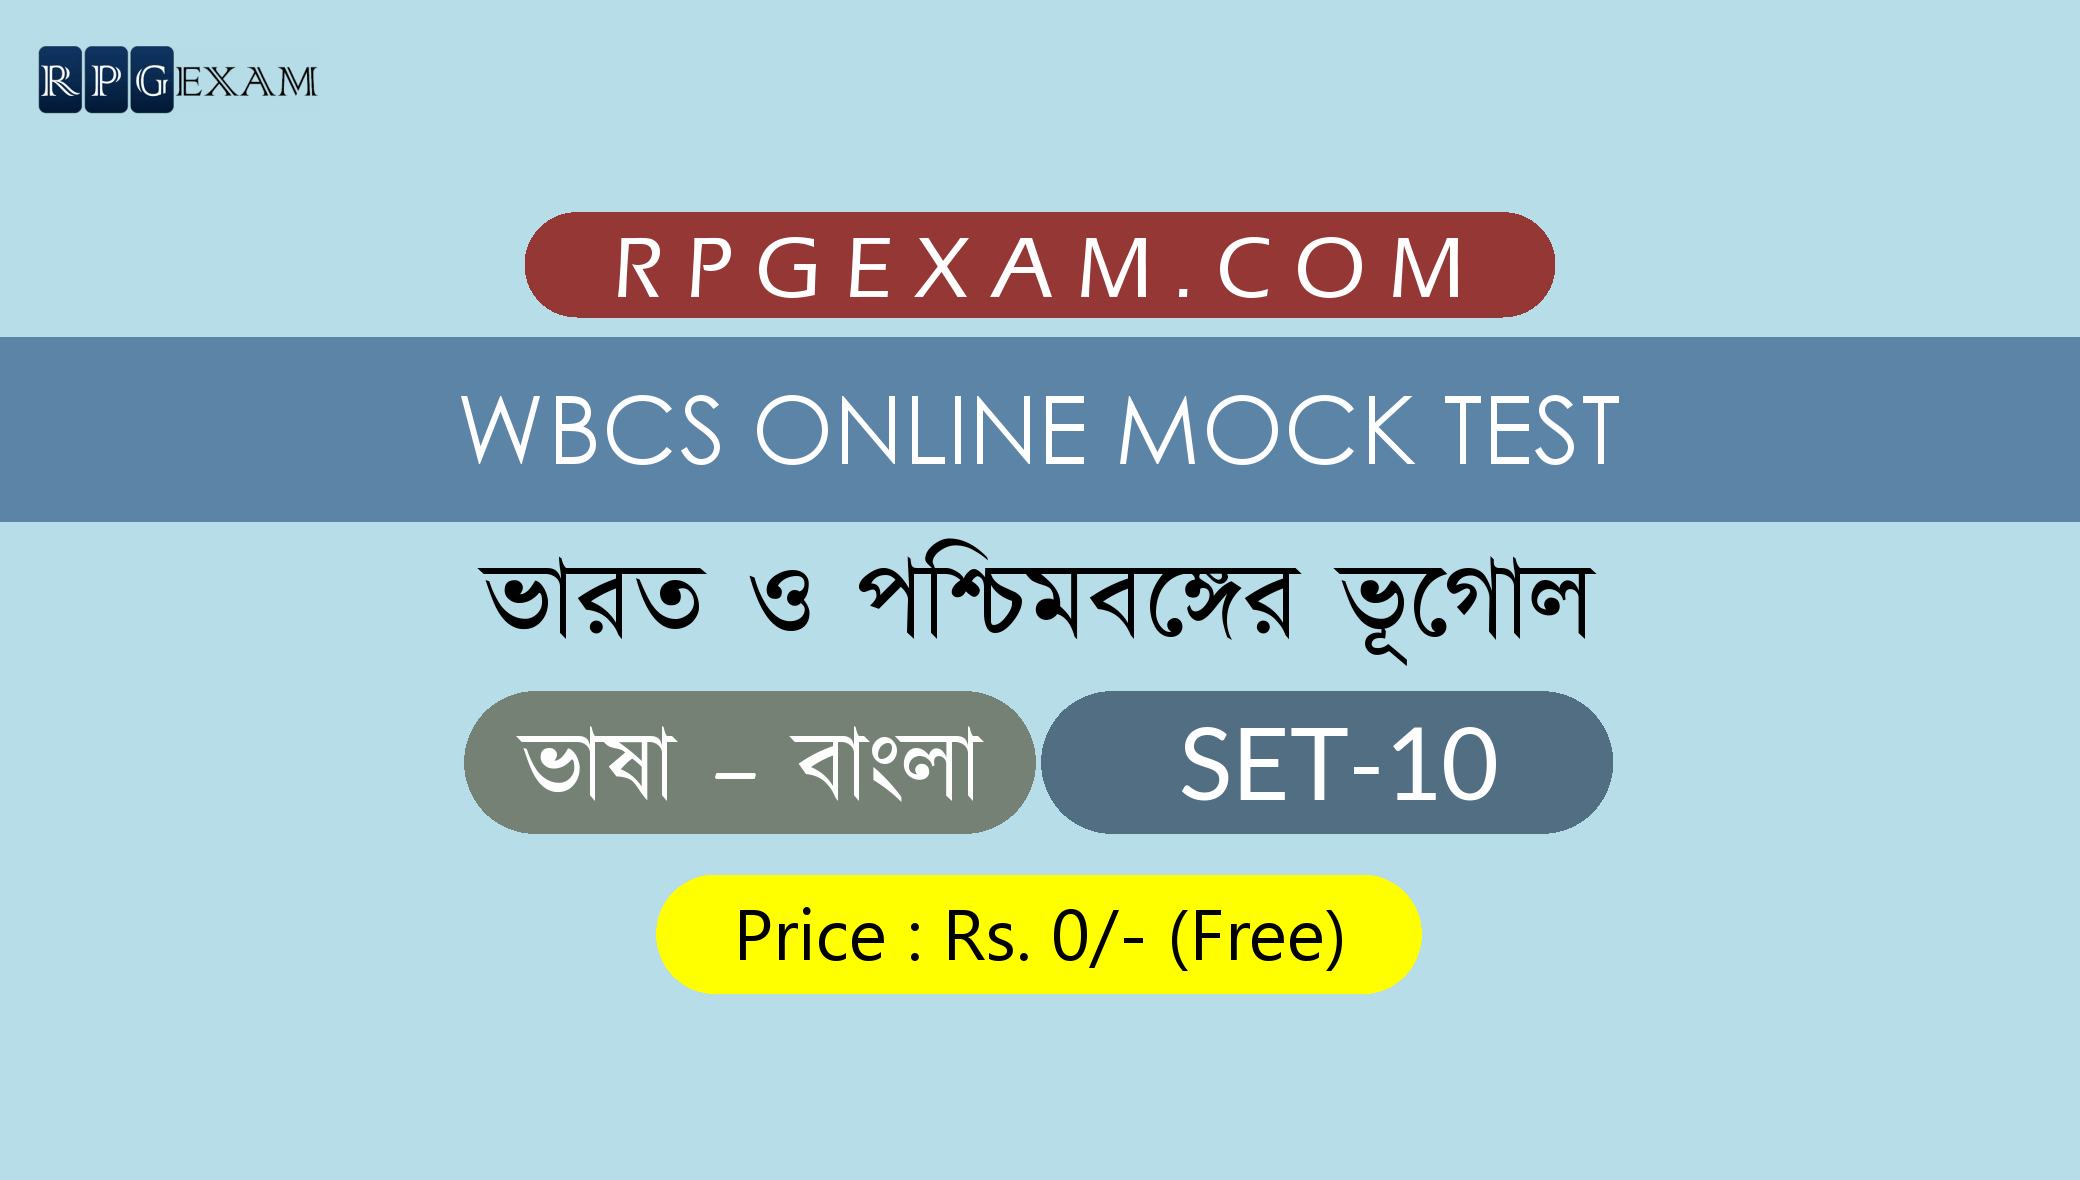 WBCS Free Online Mock Test Indian and West Bengal Geography Set 10